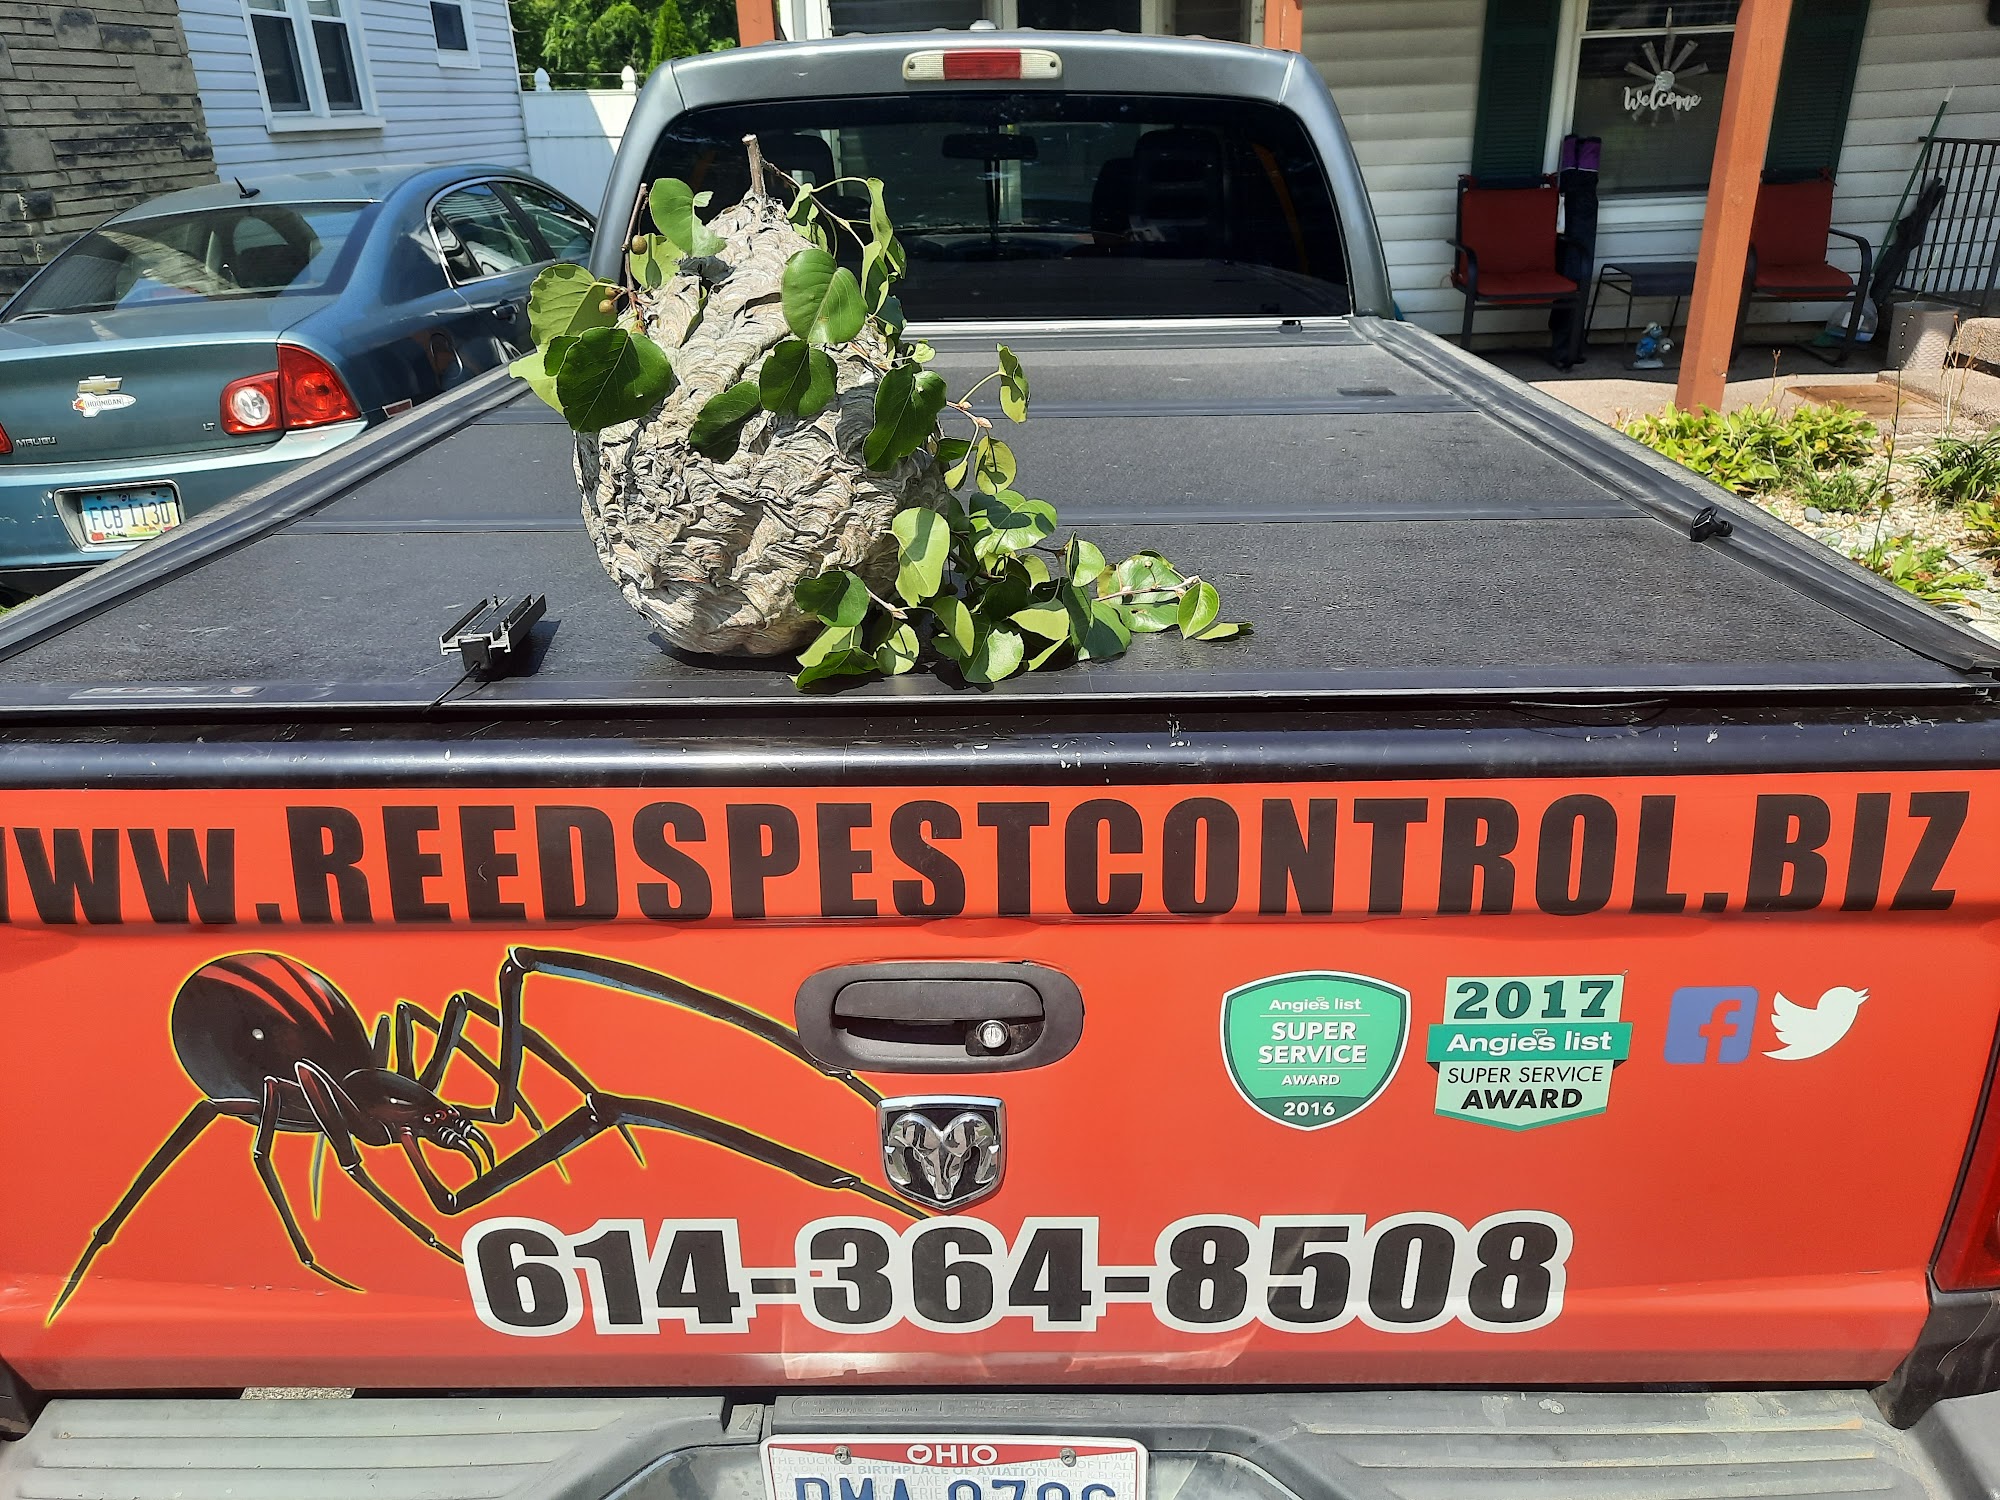 Reed's Pest Control